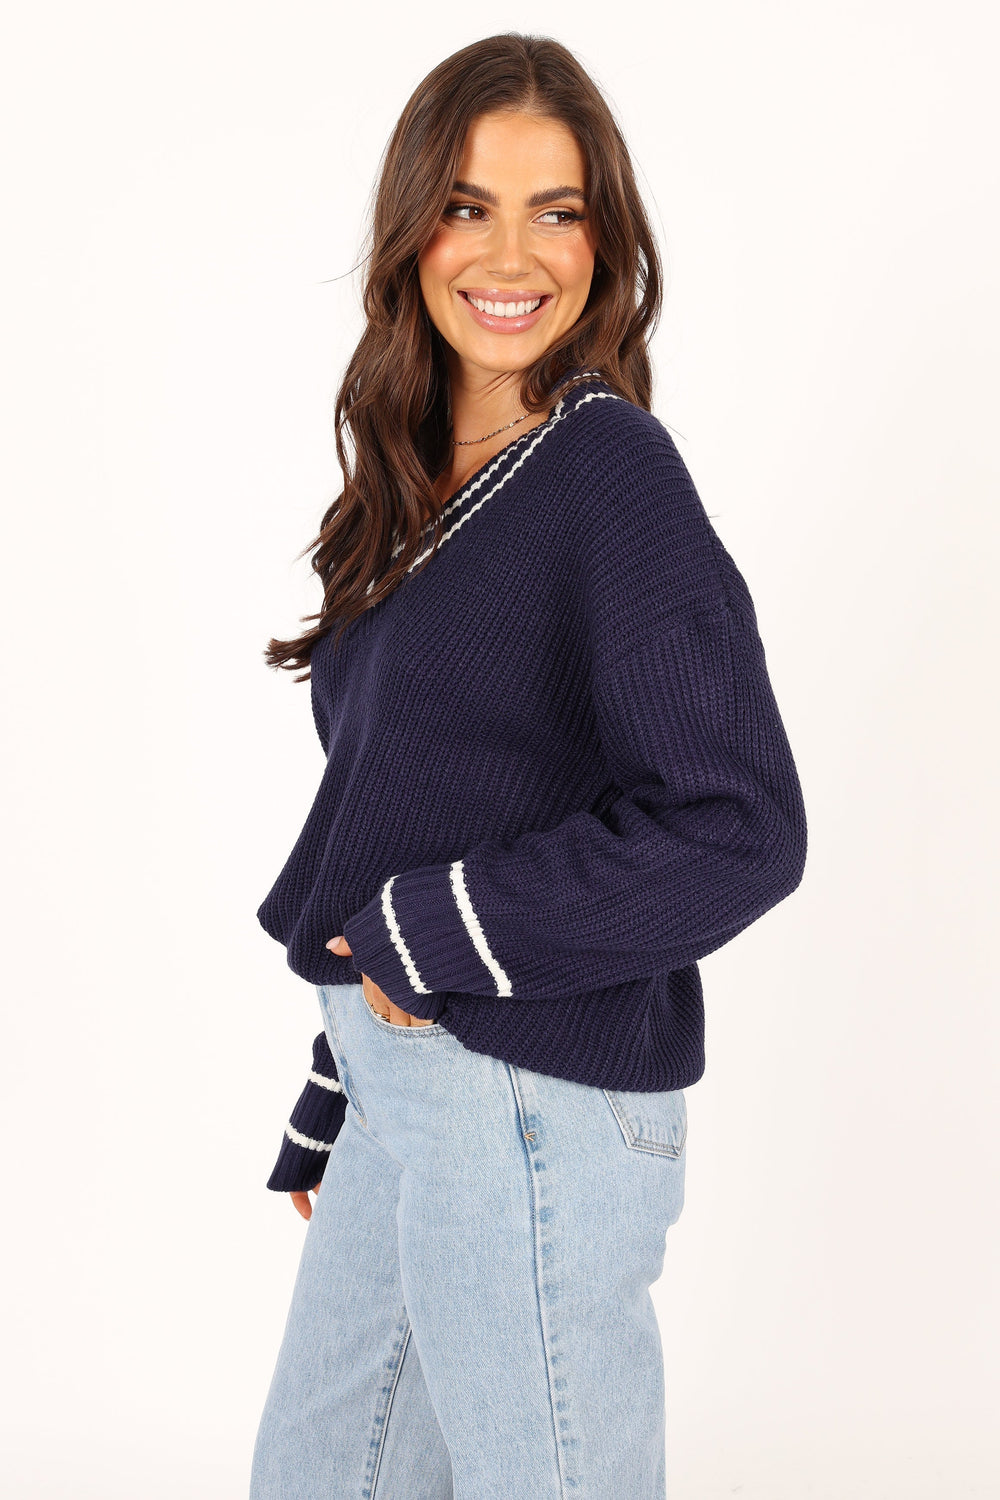 Petal and Pup USA KNITWEAR Leanna Vneck Knit Sweater - Navy